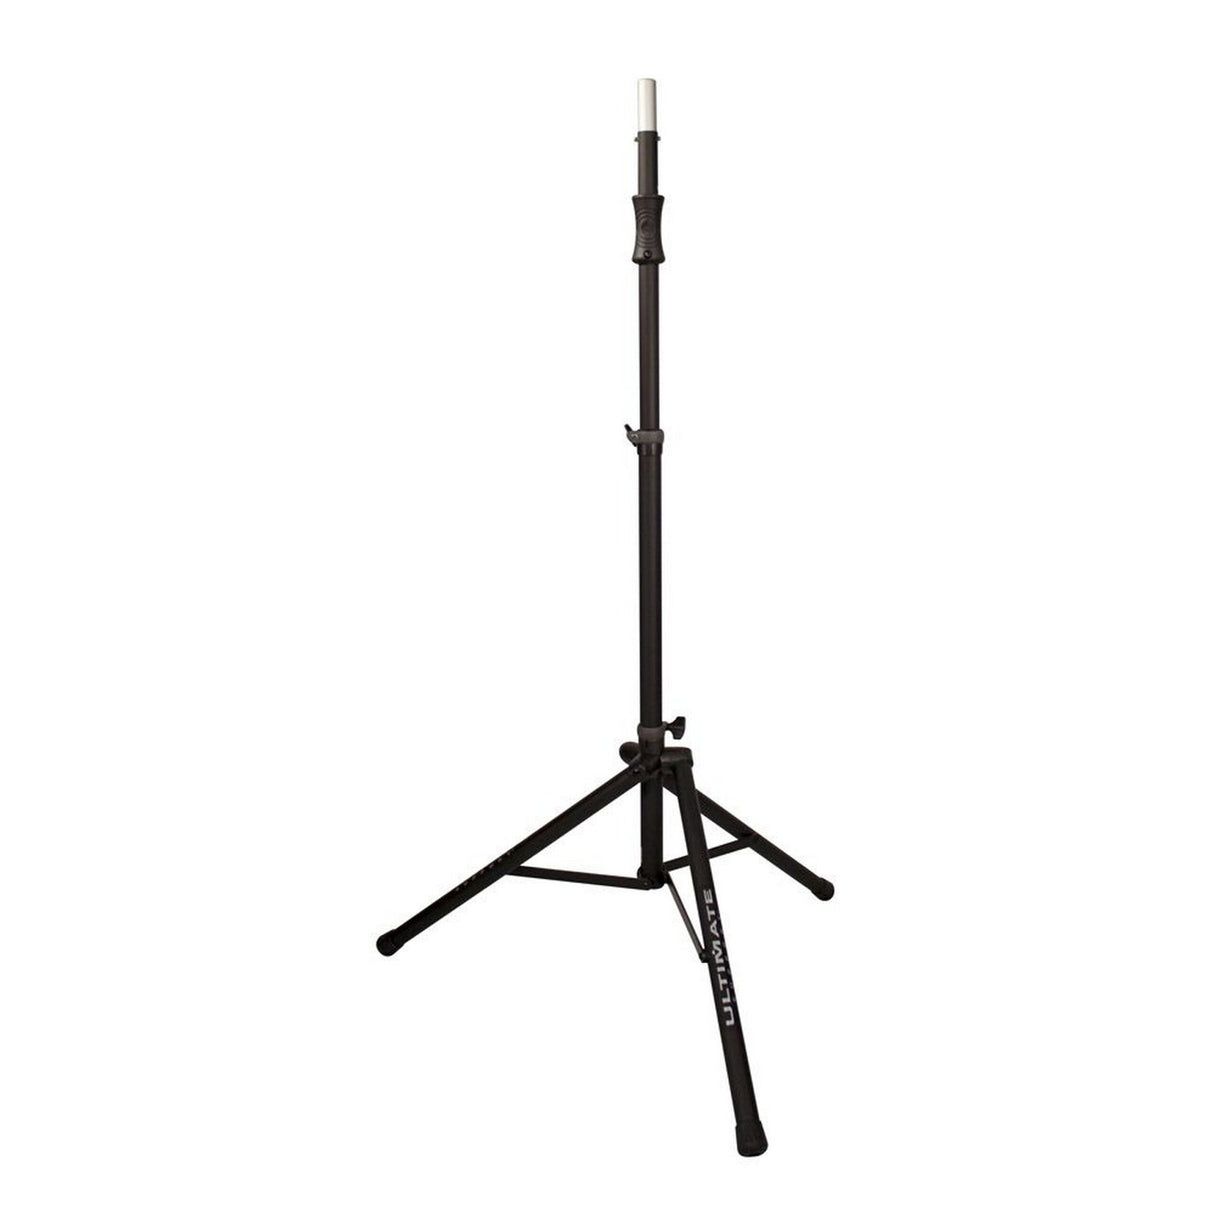 Ultimate Support TS-100B Air-Powered Lift-Assist Aluminum Tripod Speaker Stand (Used)